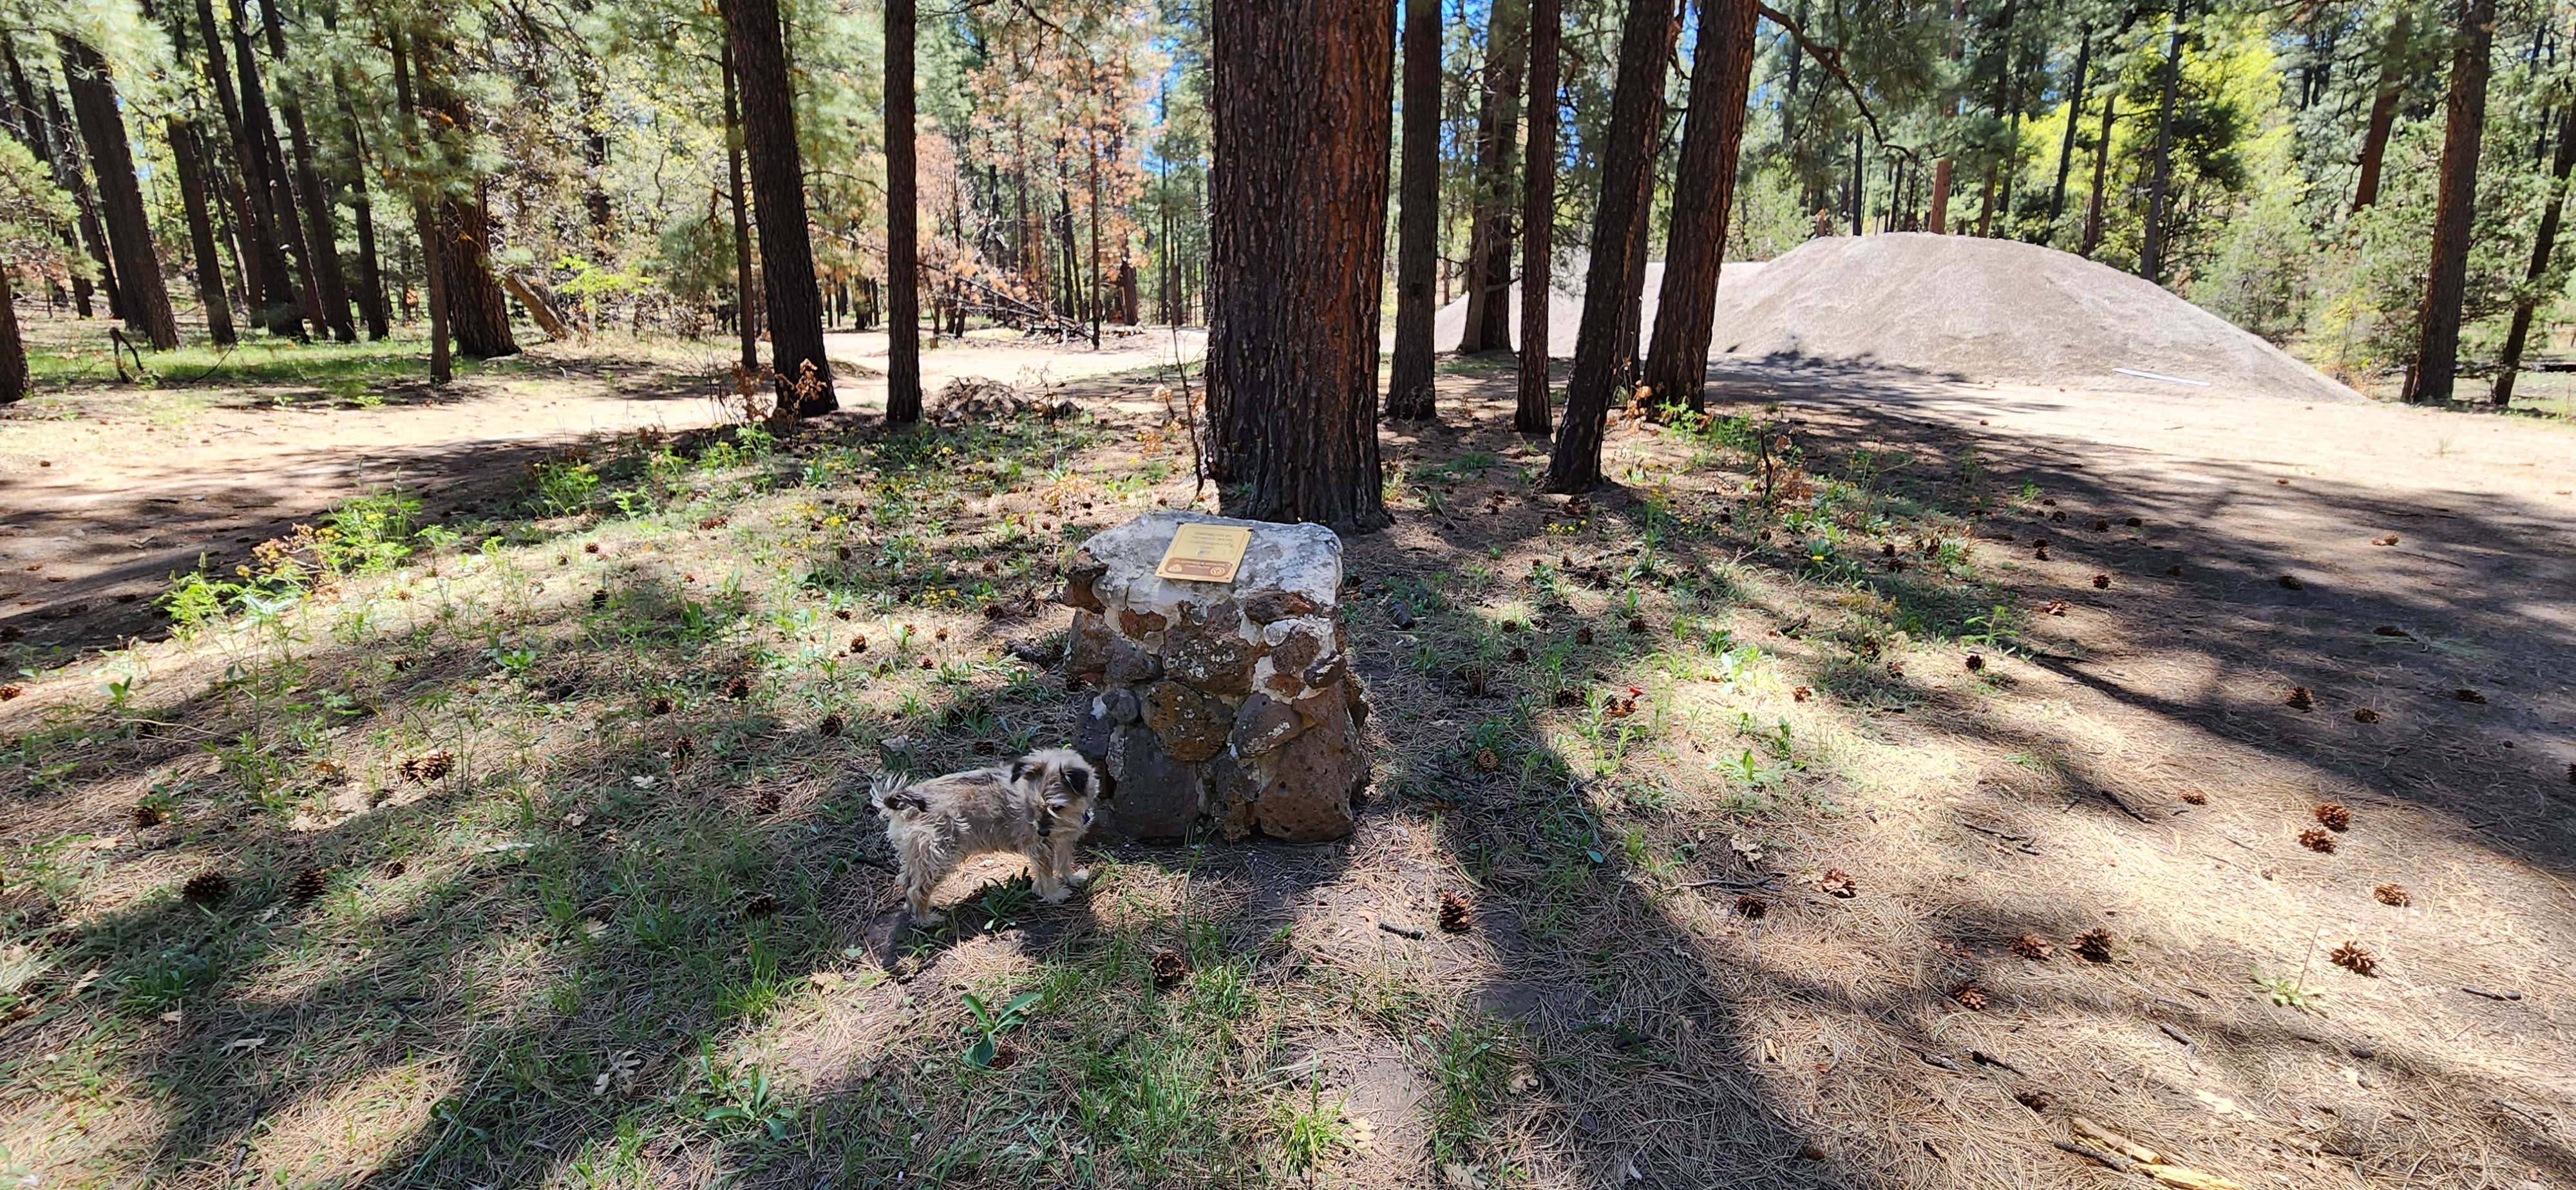 Camper submitted image from Pine Flats Campground - 2